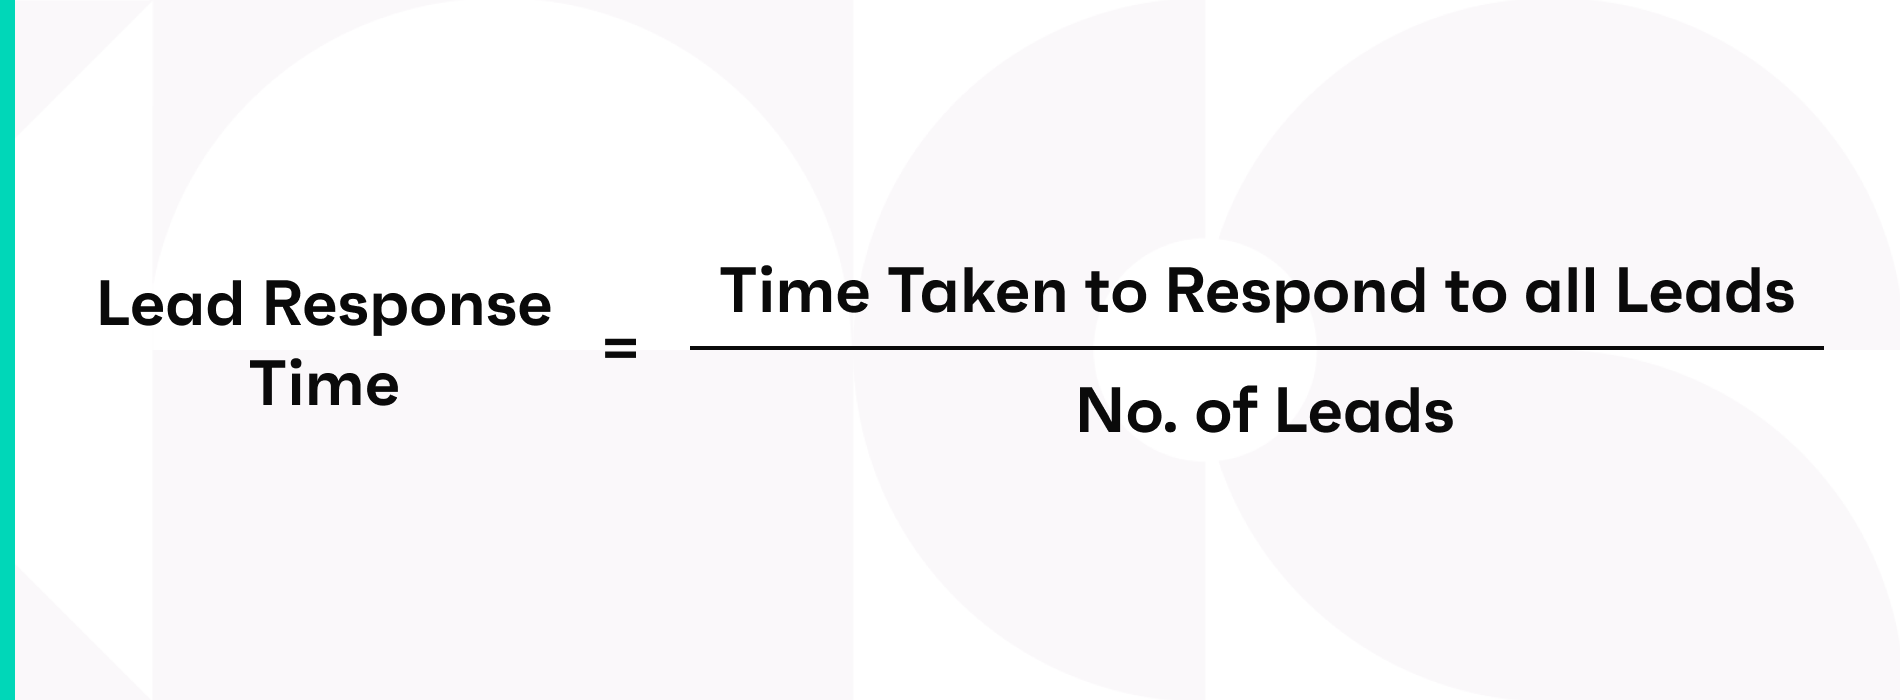 Lead Response Time = Time taken to respond to all leads / No. of leads